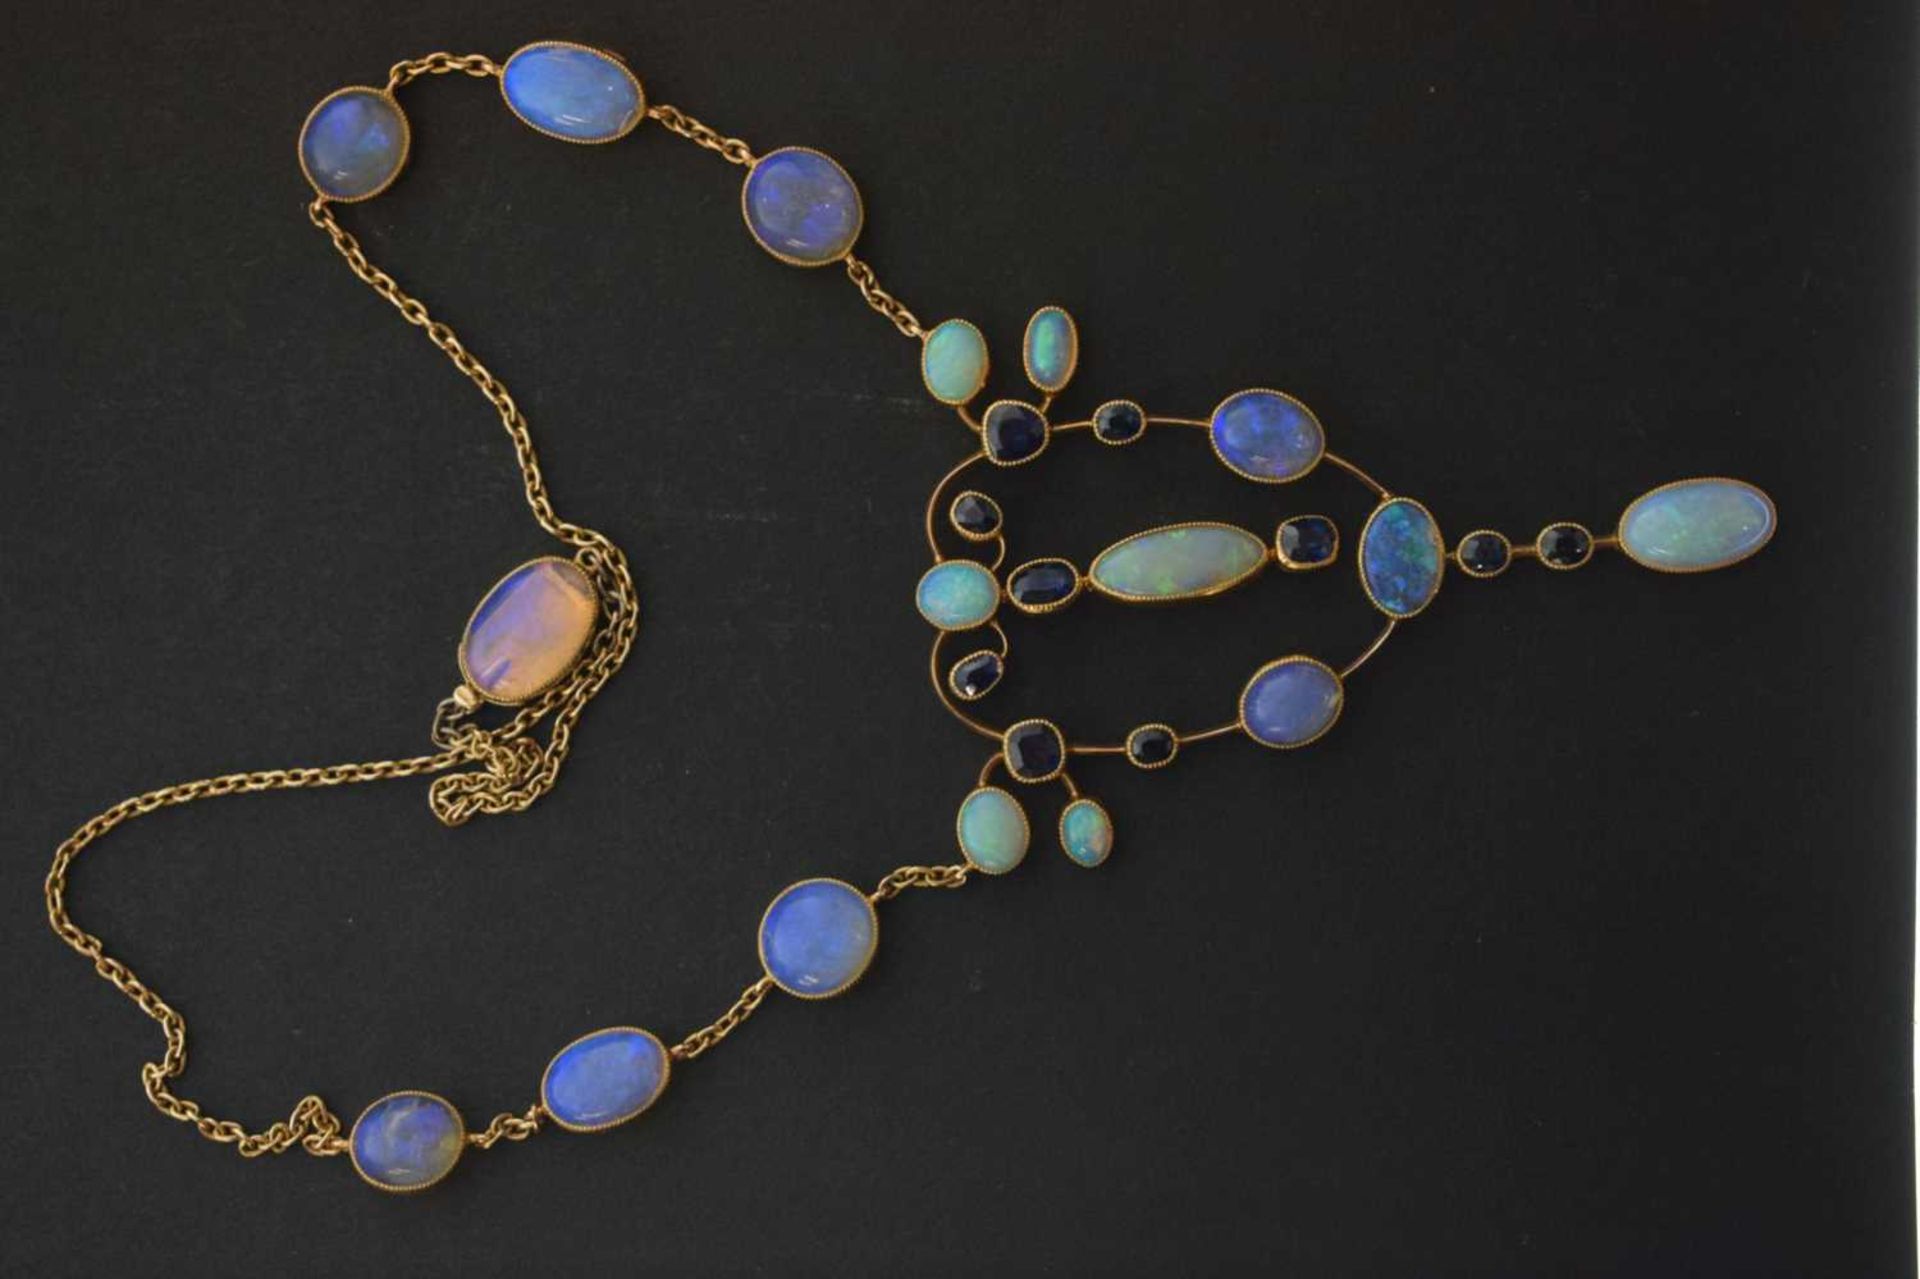 Opal and sapphire pendant necklace in the Arts and Crafts manner - Image 2 of 12